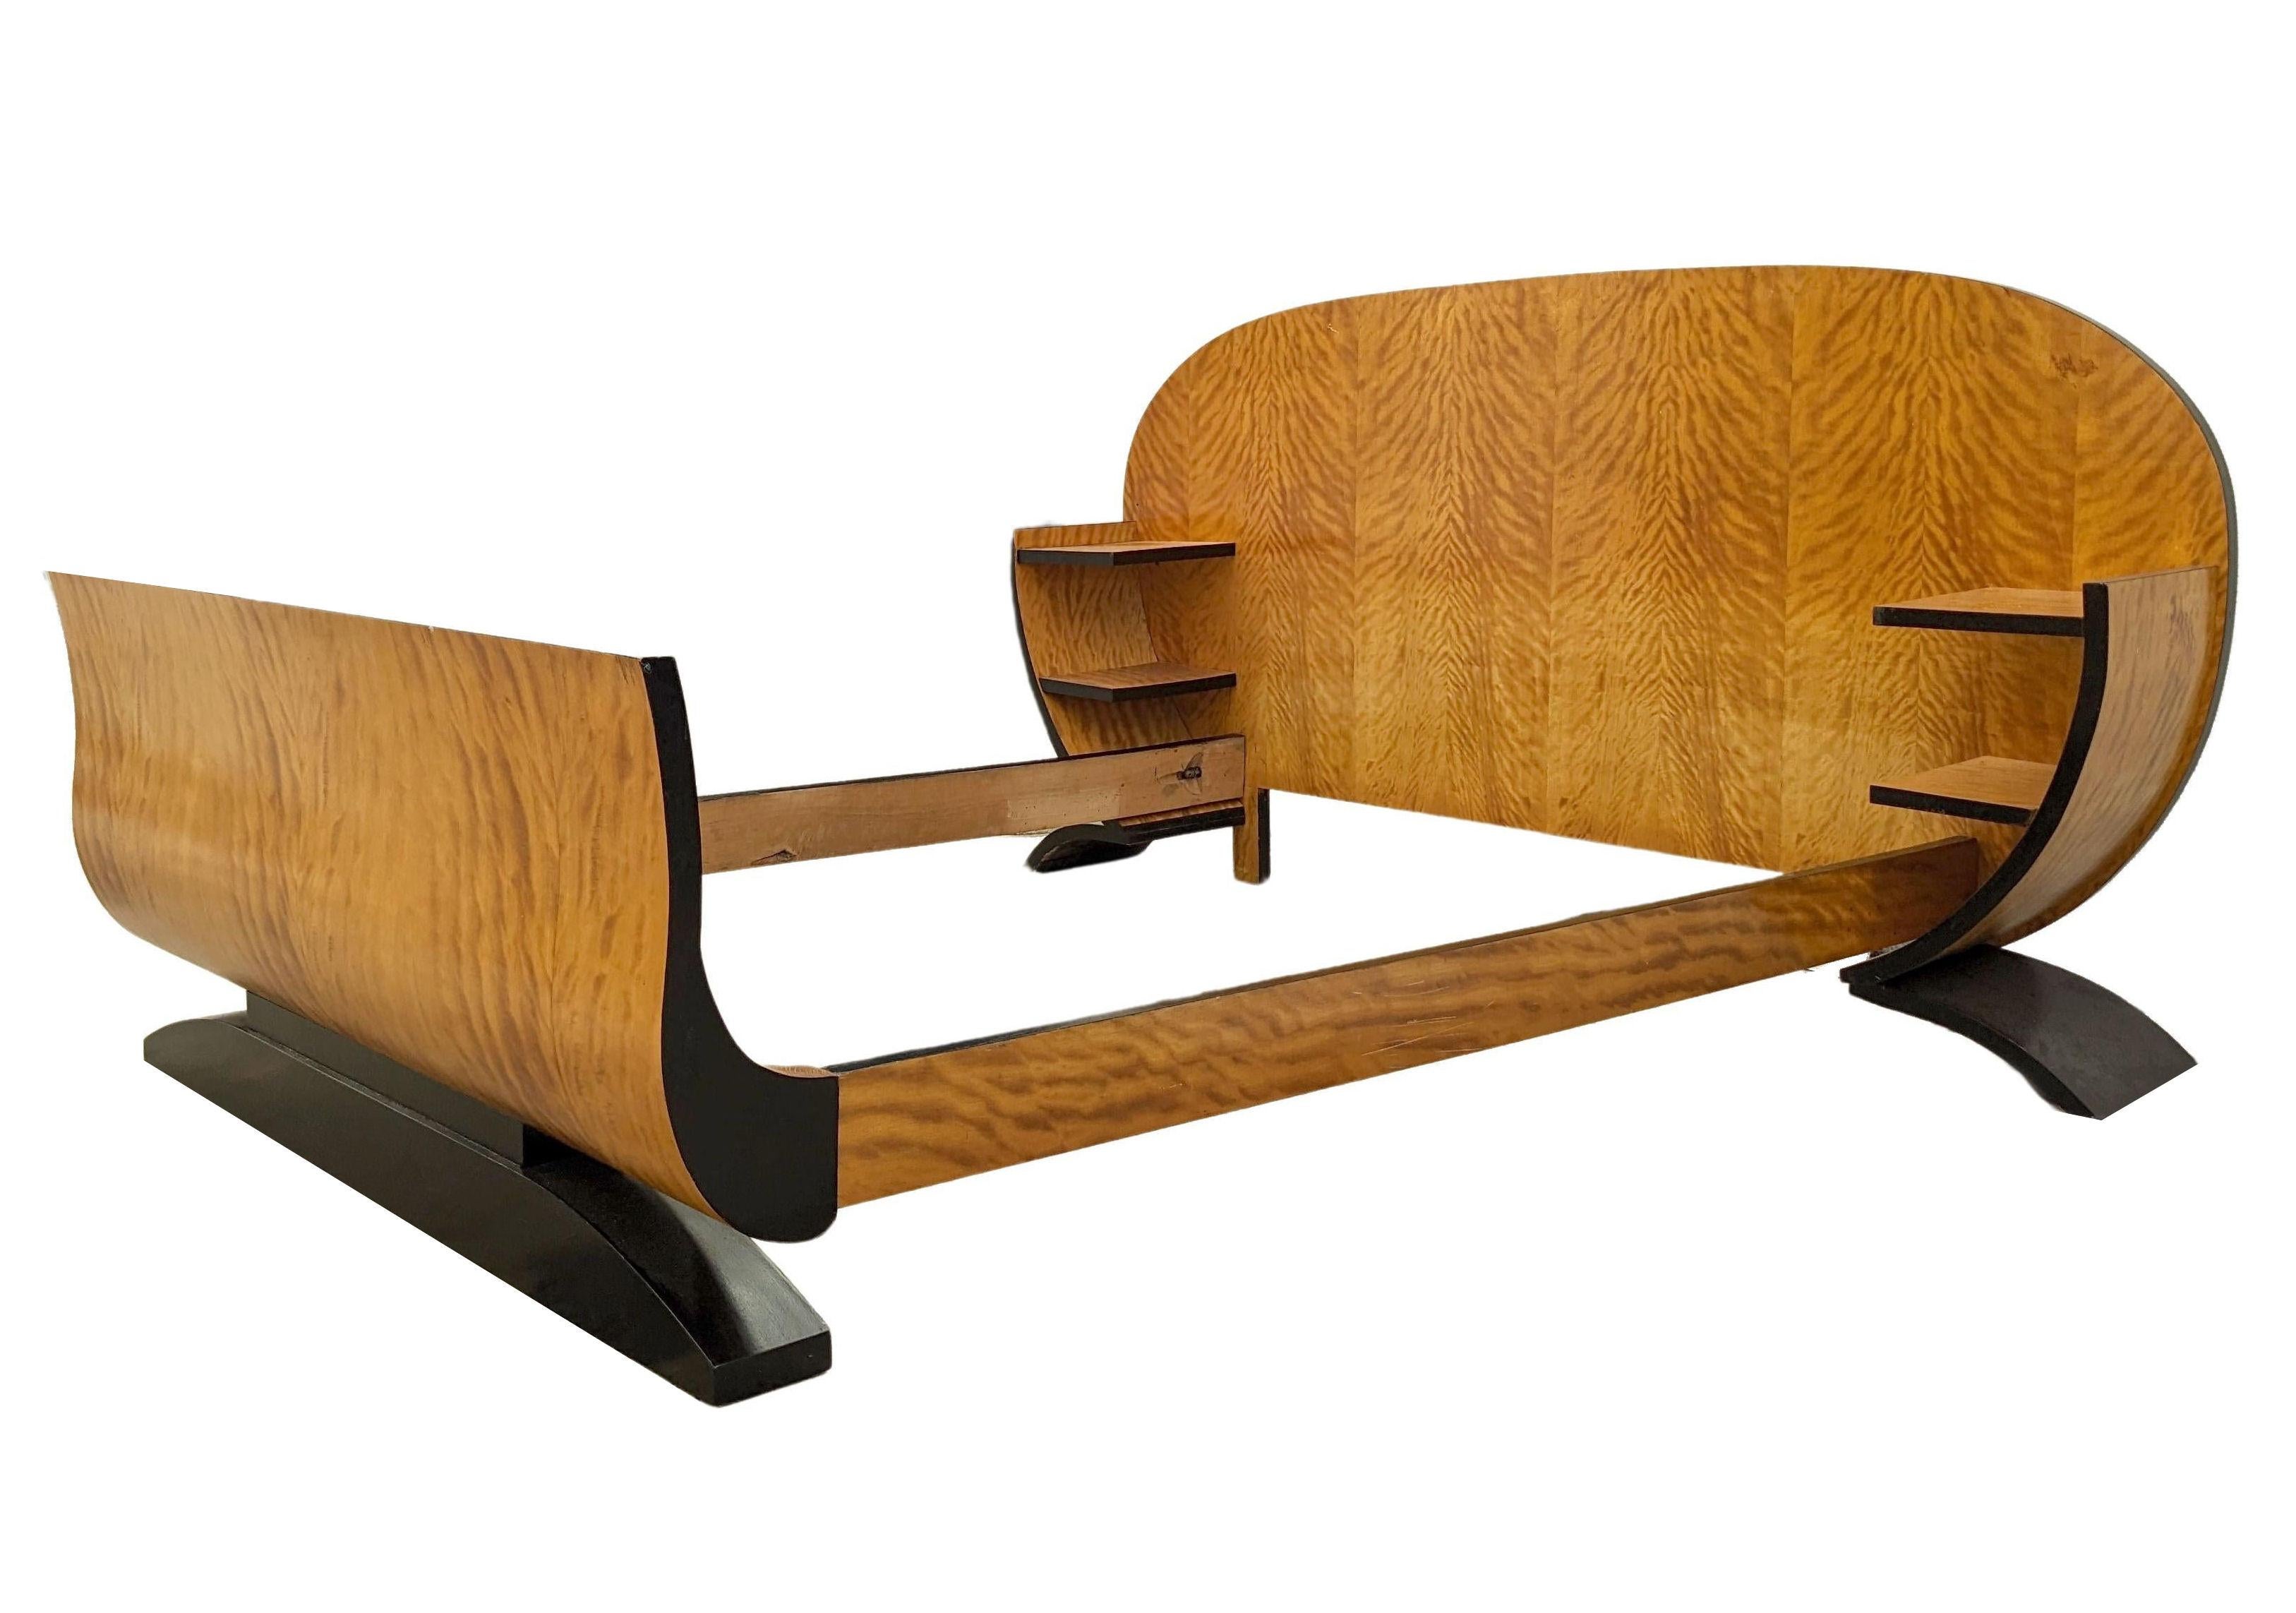 Spectacular Art Deco Modernist French Double Bed, Circa 1935 For Sale 1